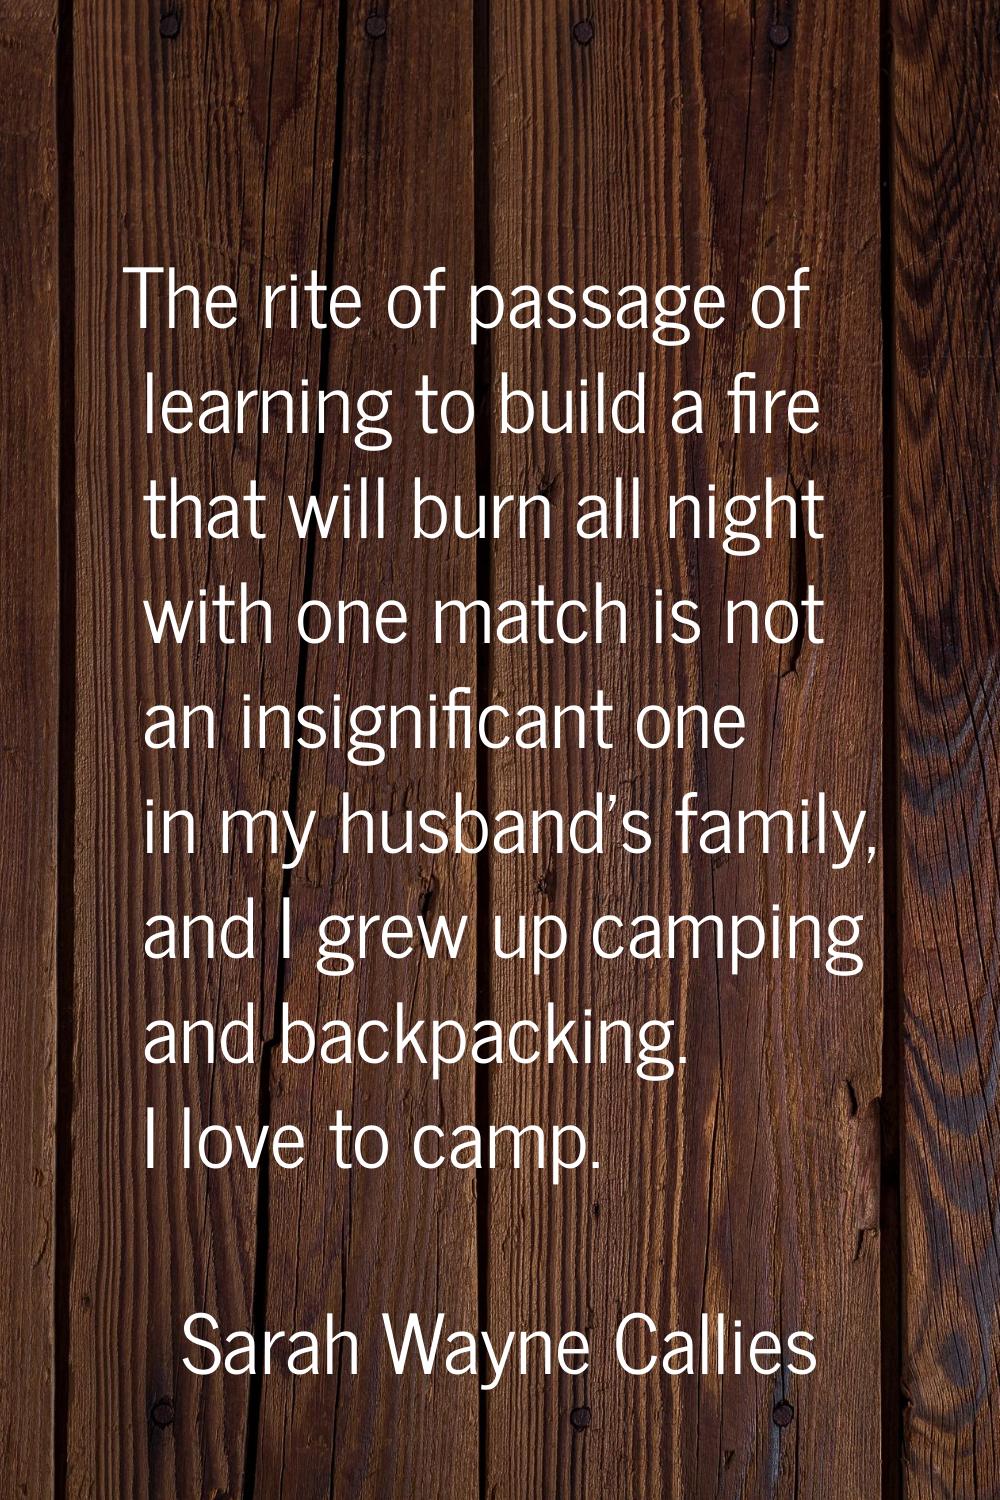 The rite of passage of learning to build a fire that will burn all night with one match is not an i